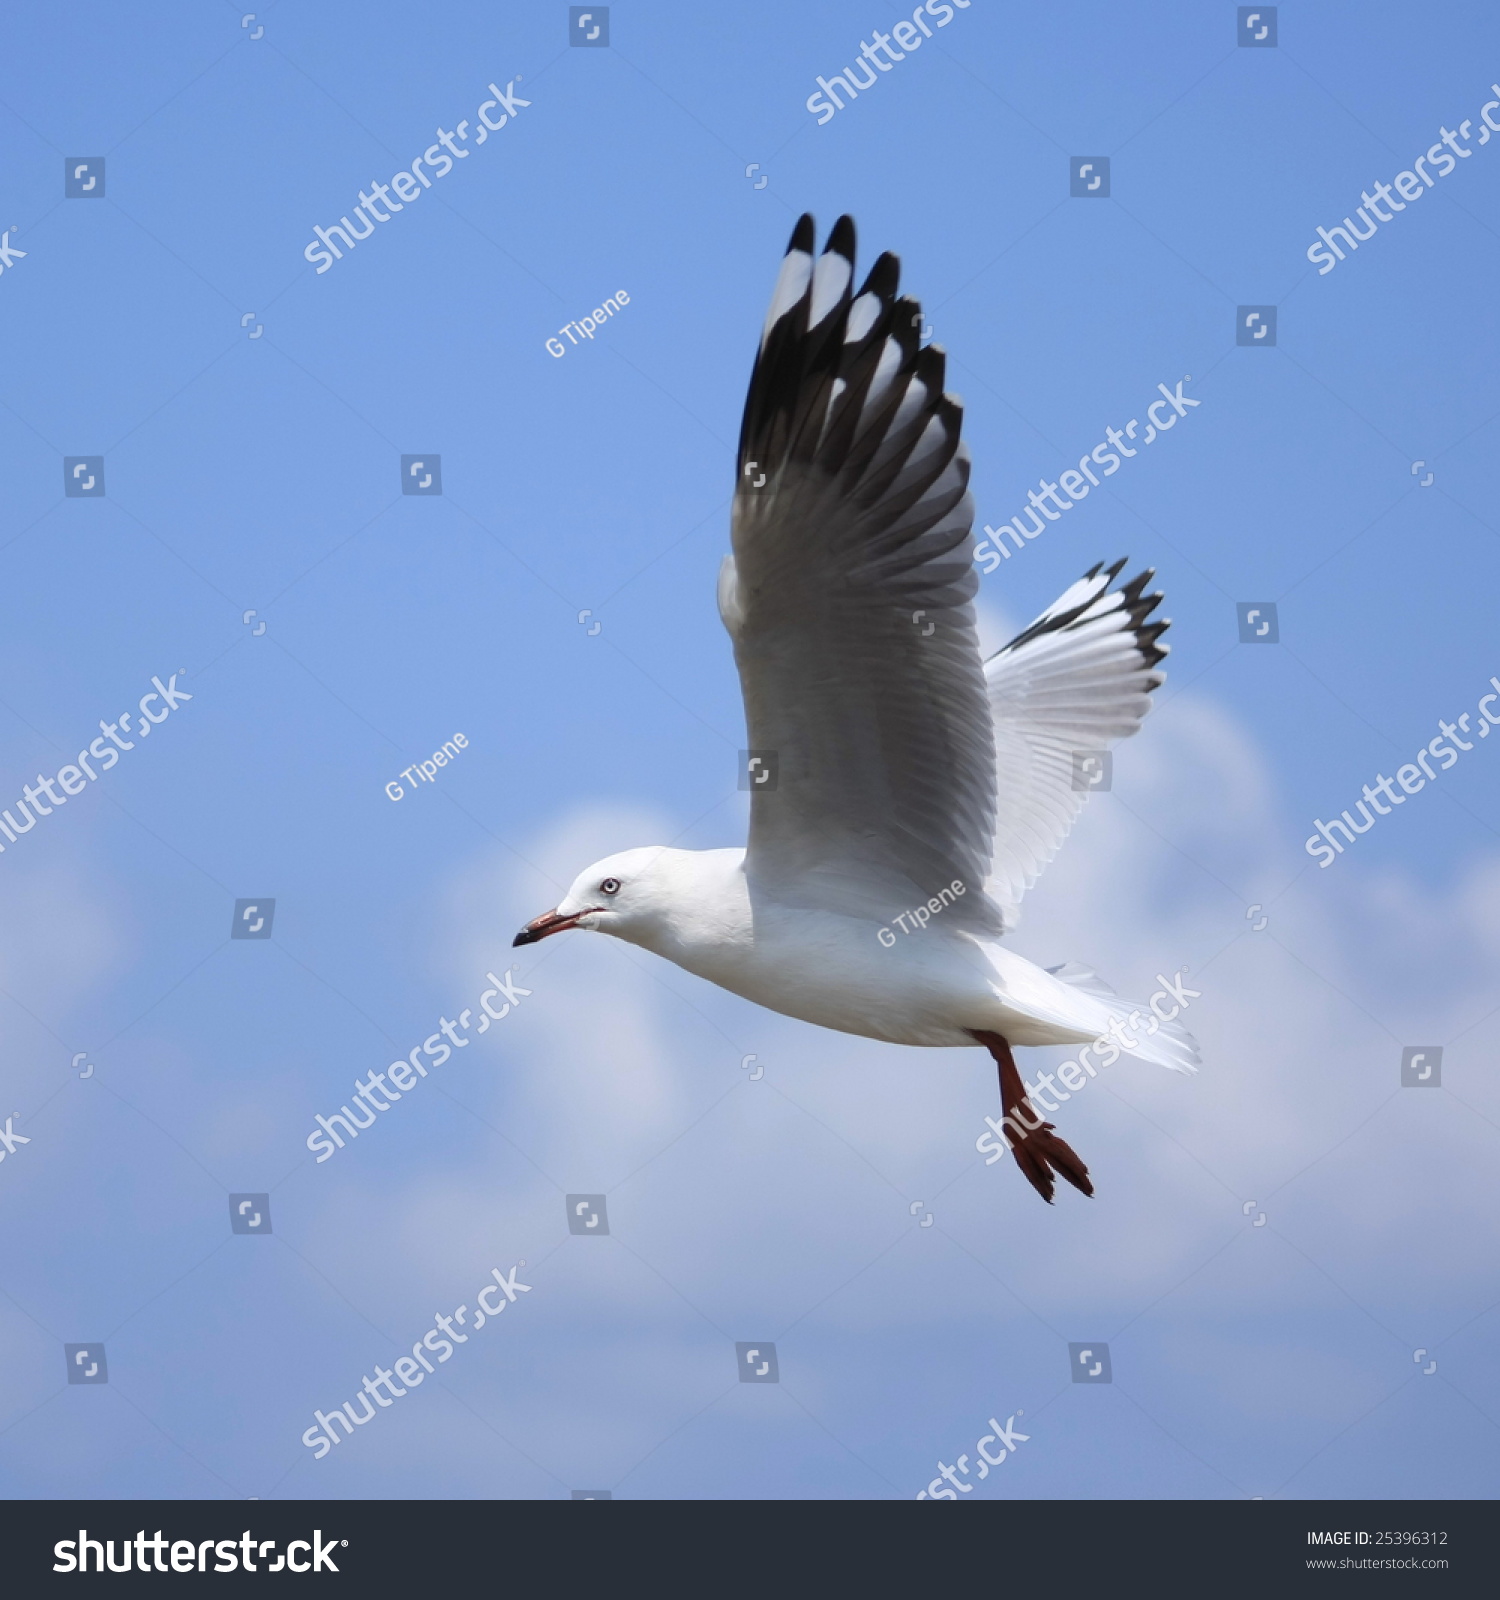 Seagull Flying High On Wind Stock Photo 25396312 - Shutterstock